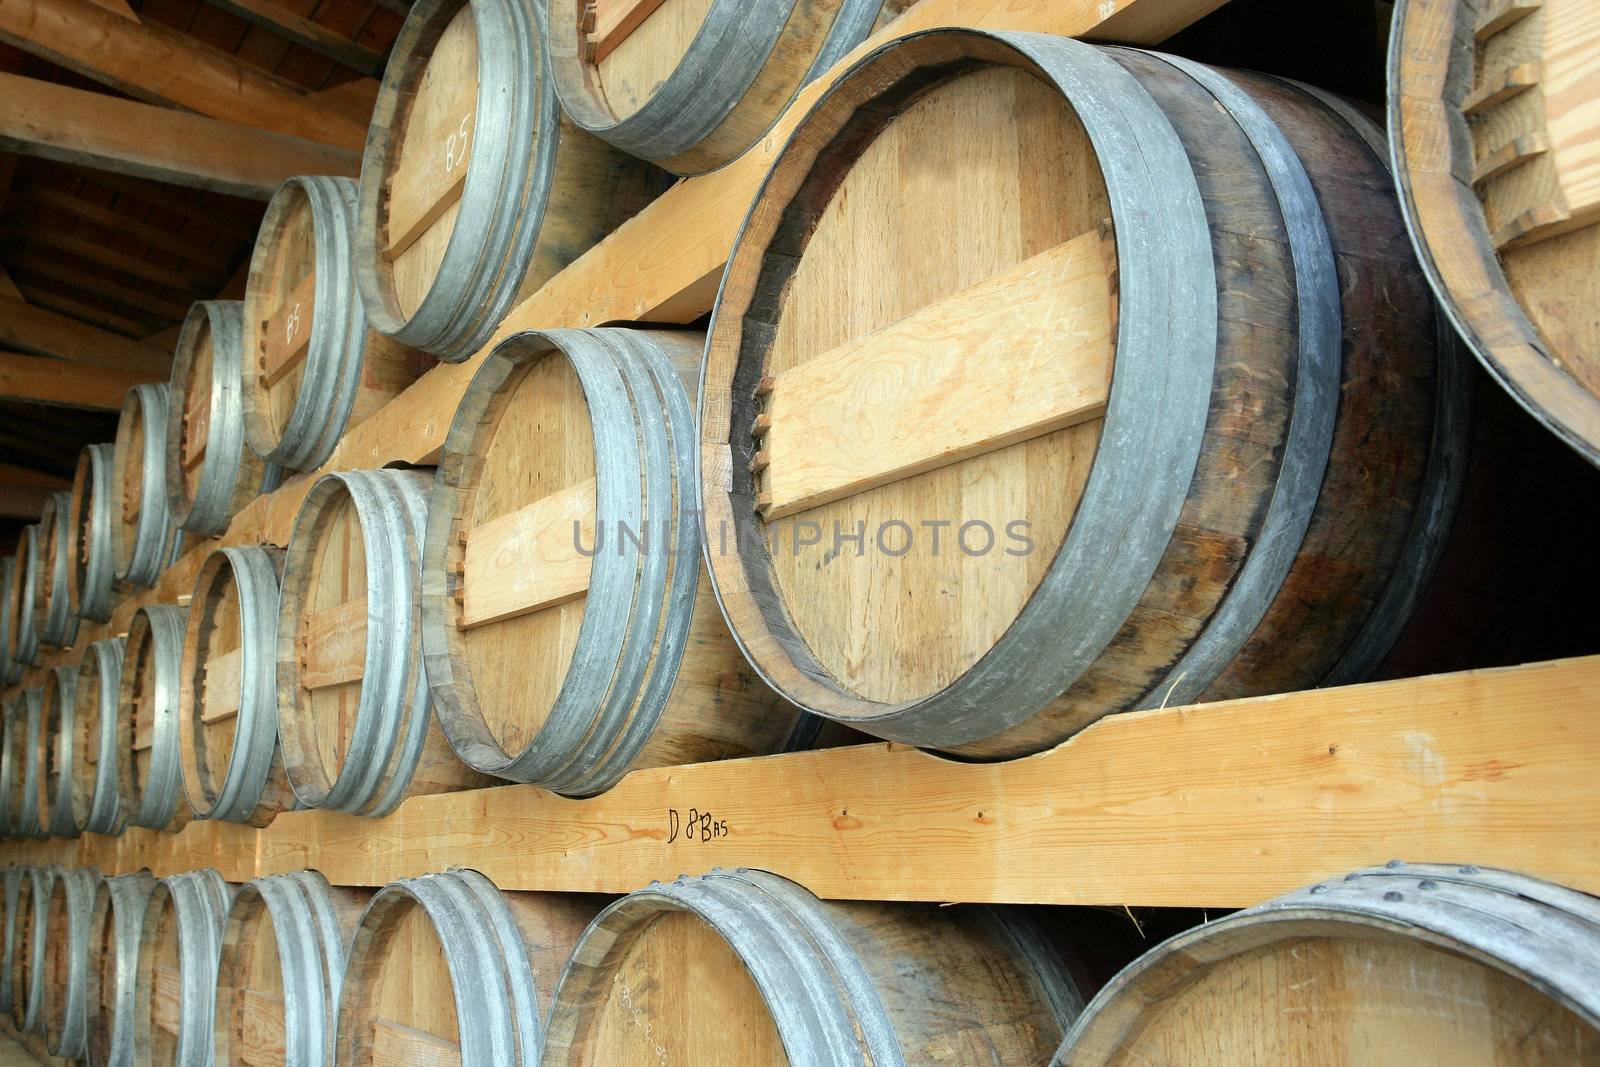 Barrels stored in a cellar by phovoir